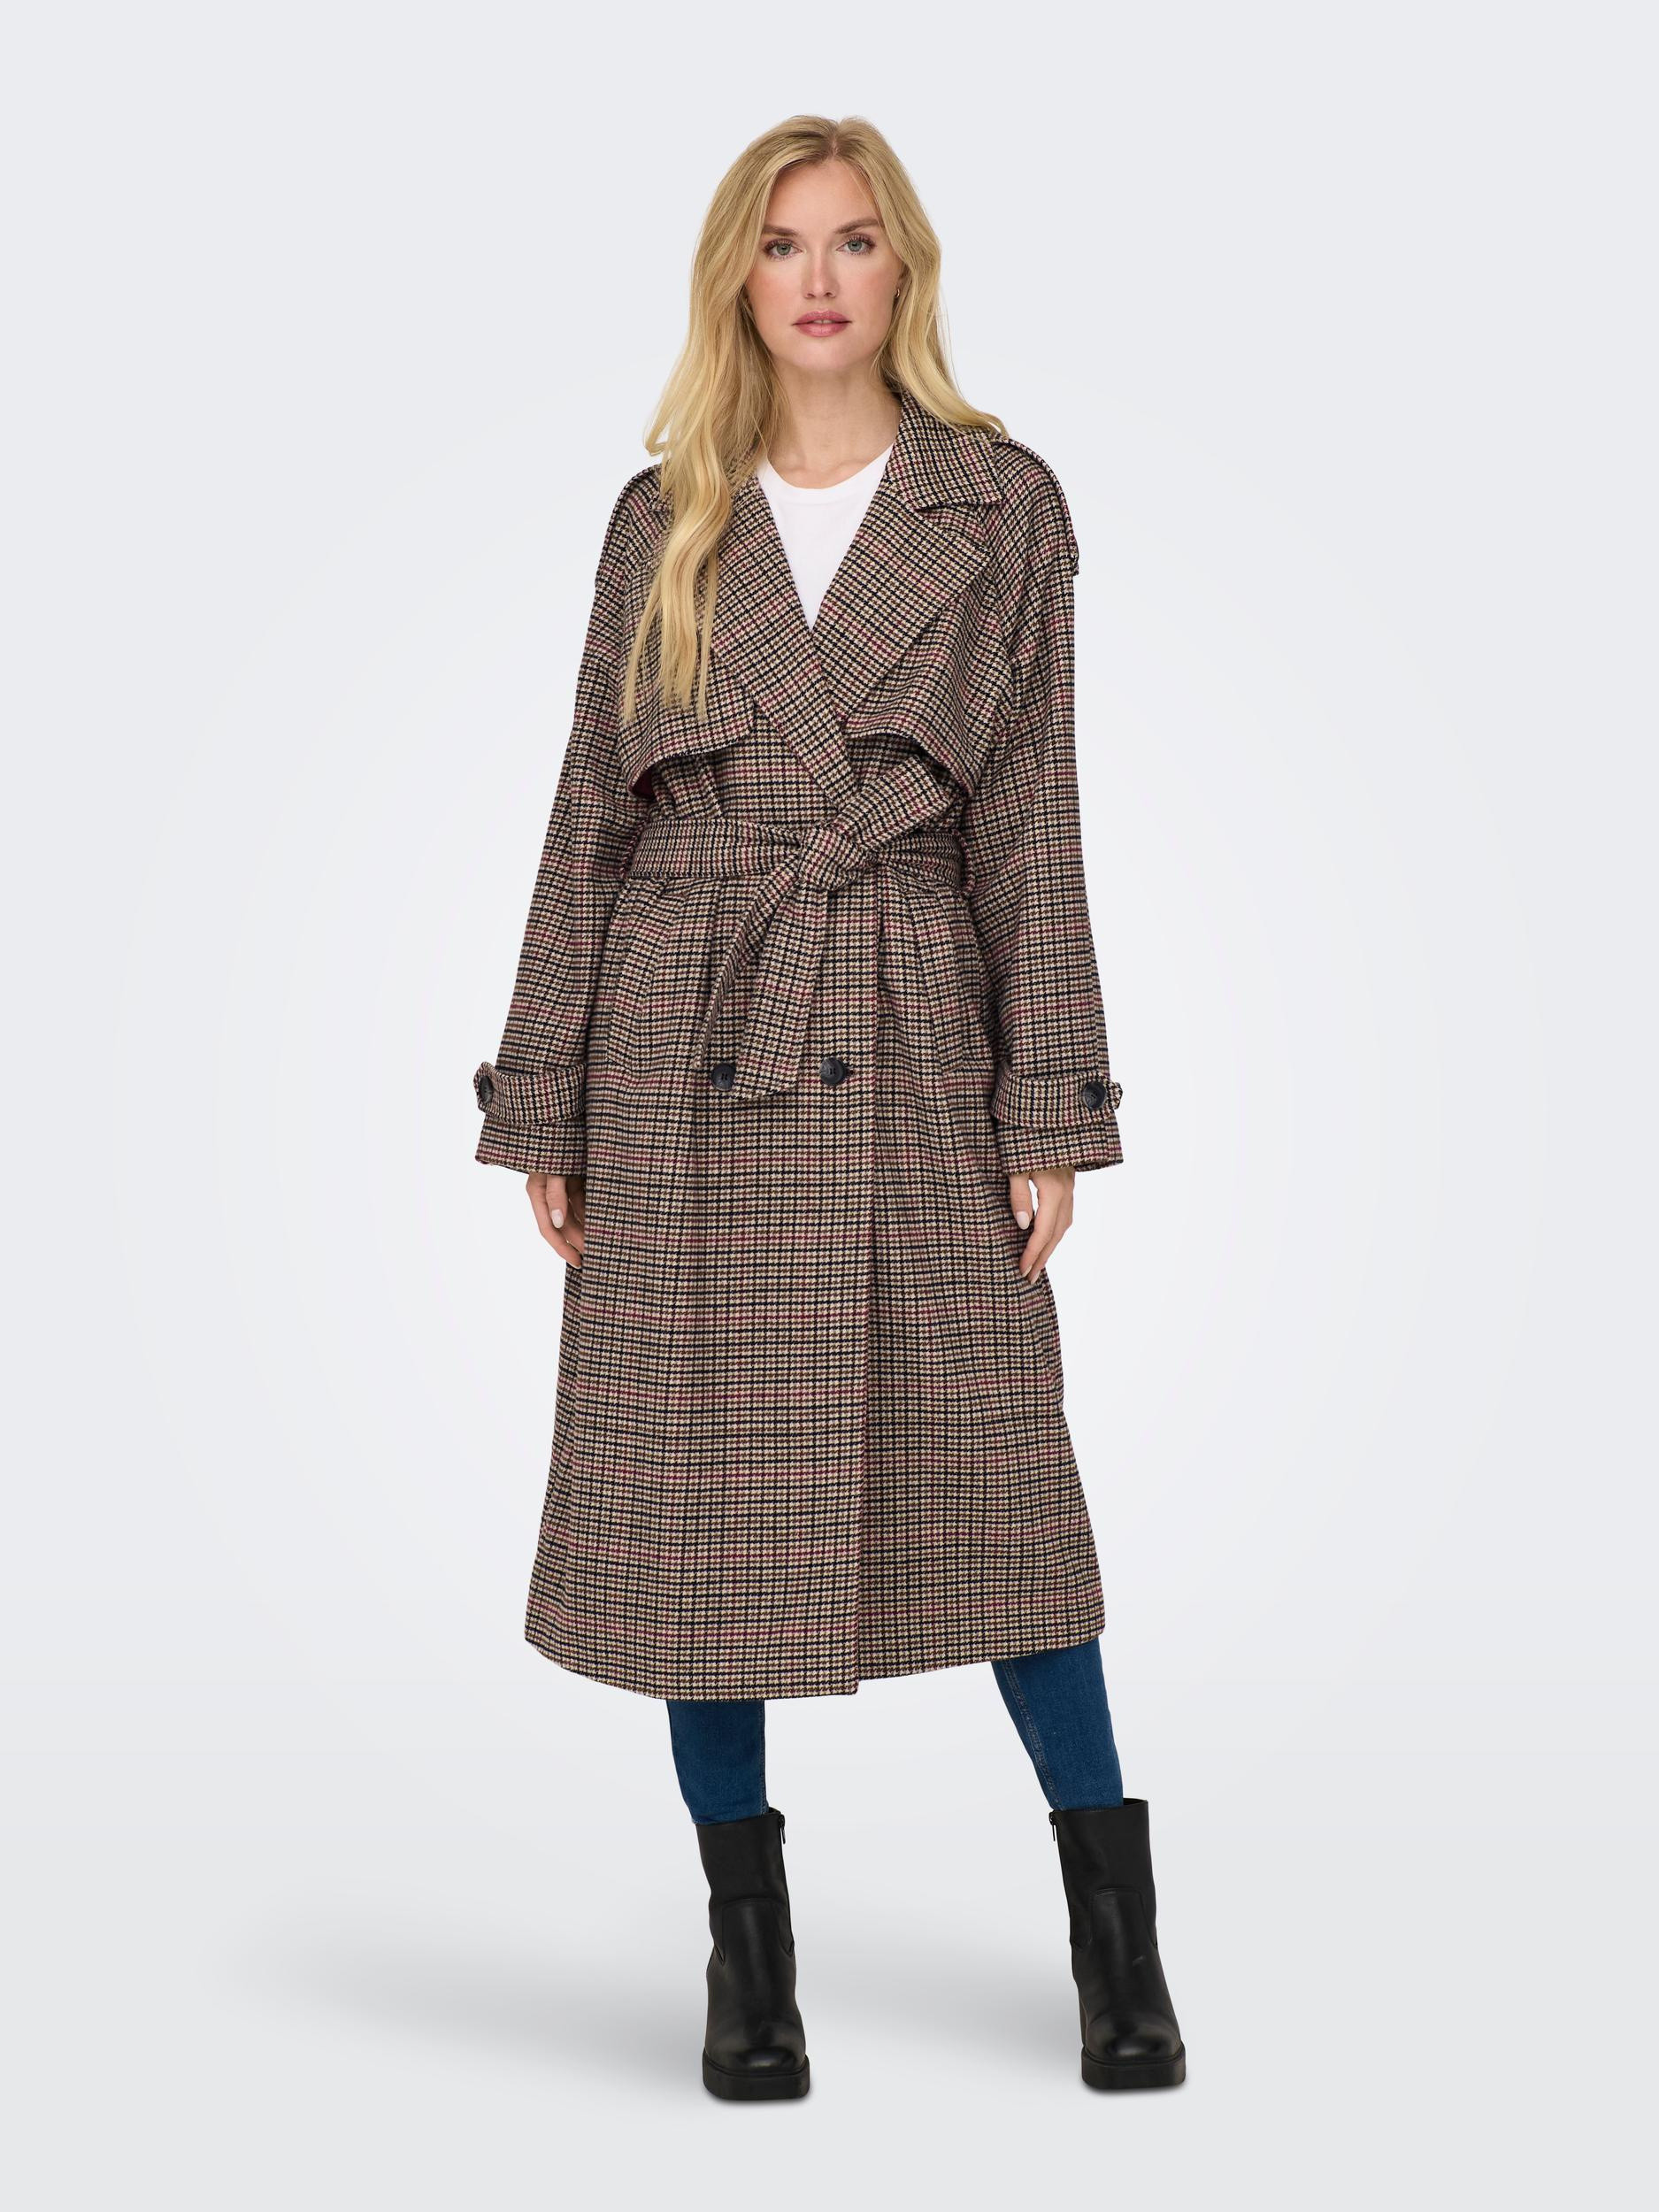 Only - Checked trench coat, Light Brown, large image number 2